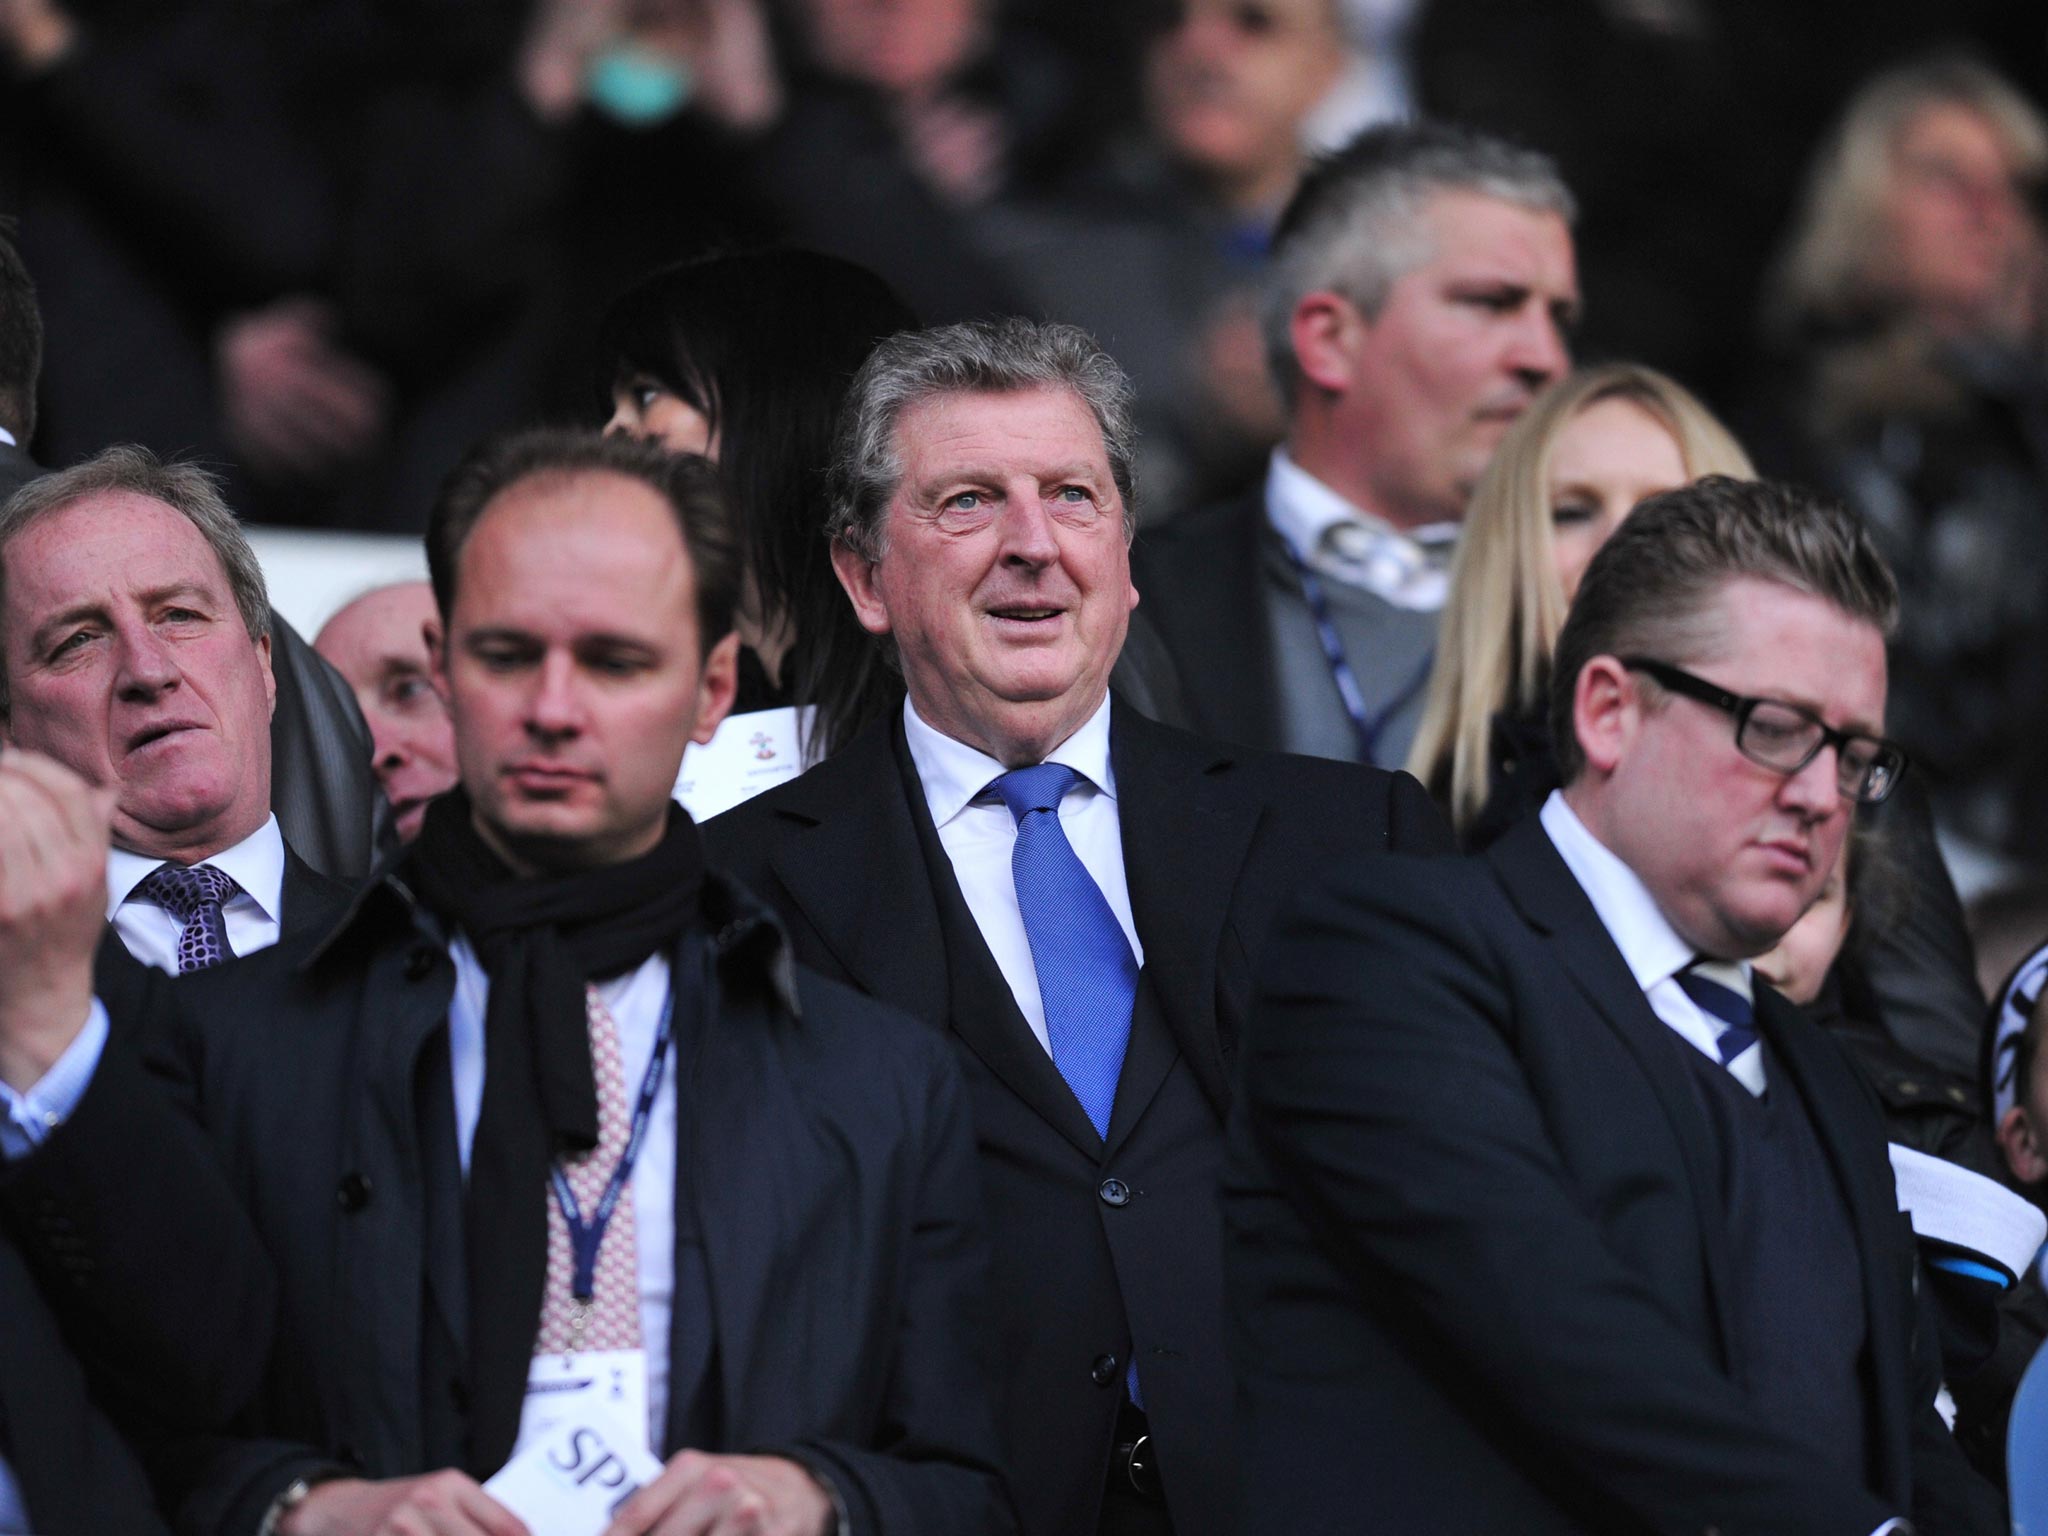 Roy Hodgson’s first World Cup finals match as England manager
will be in Manaus on 14 June